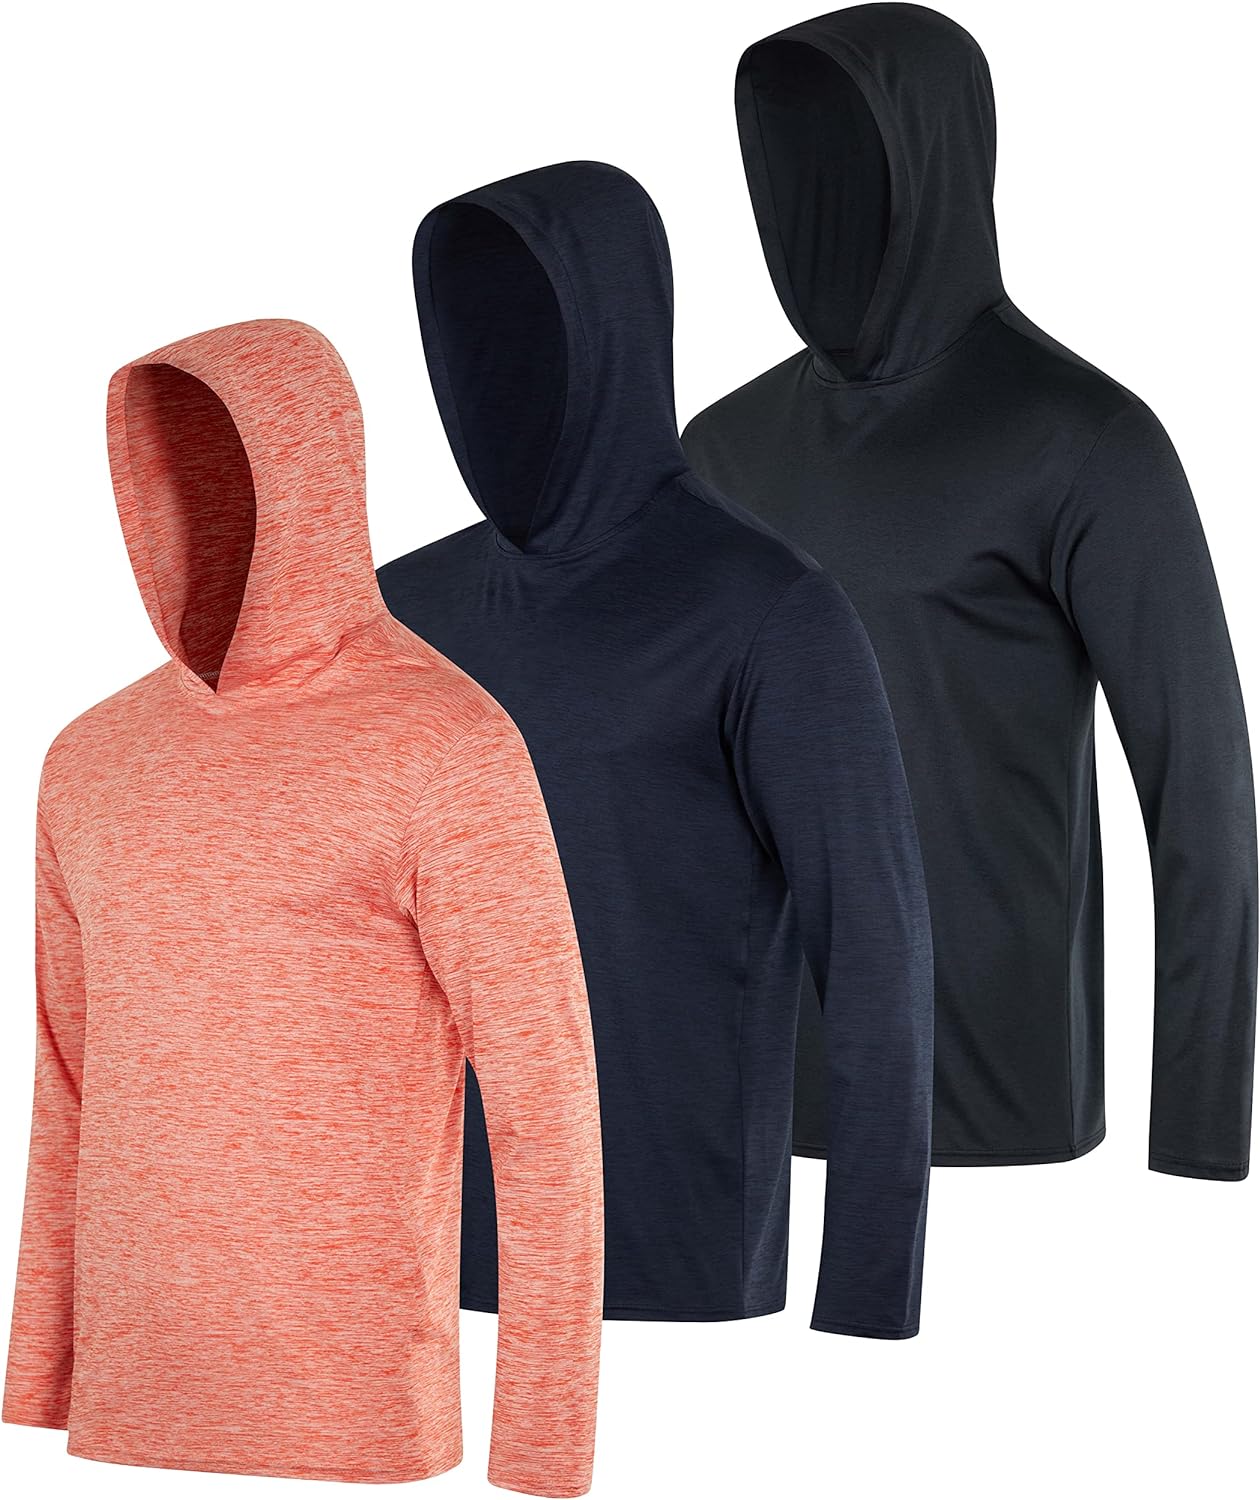 Very Comfortable and good for working out or just wearing as layering. Nice appearance and quality and good value...